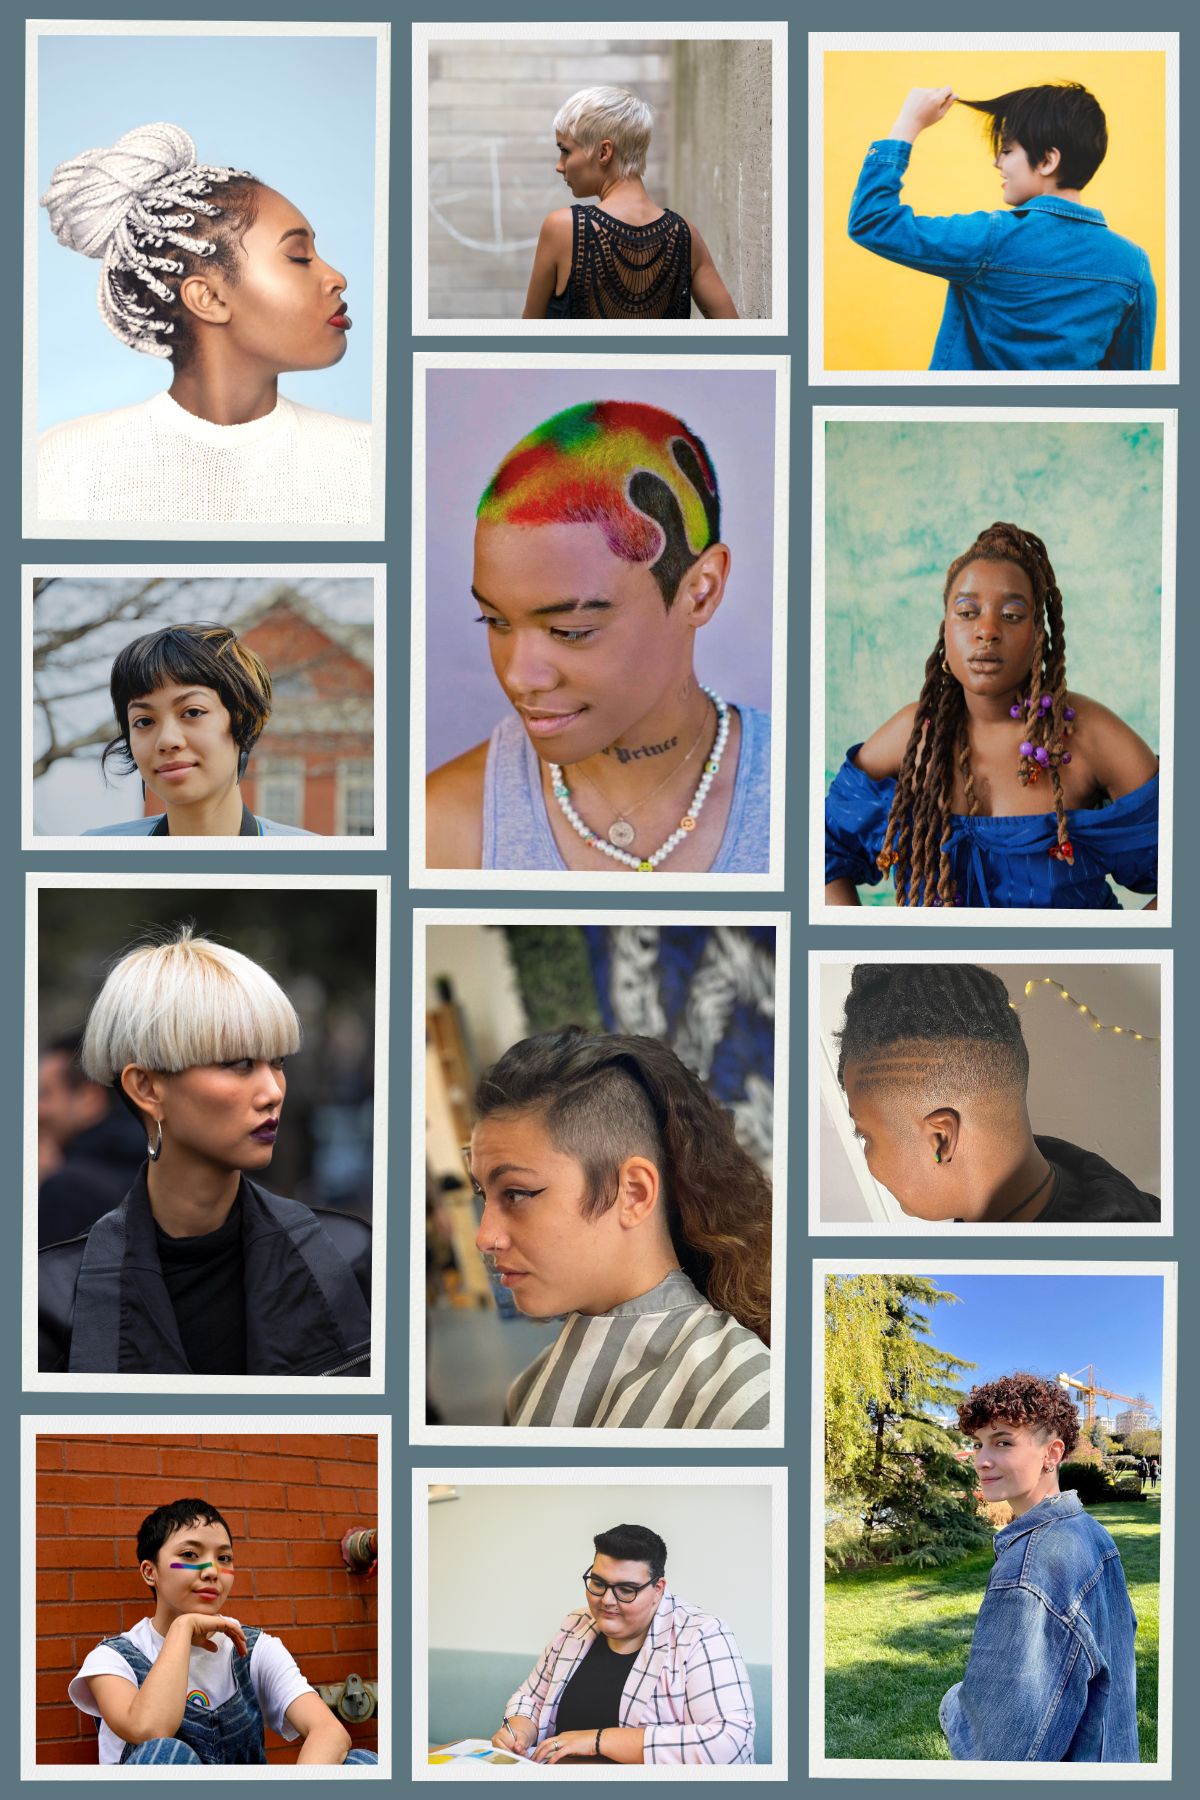 mønt Leia ryste 29 Epic Queer & Lesbian Haircuts and Lesbian Hairstyles